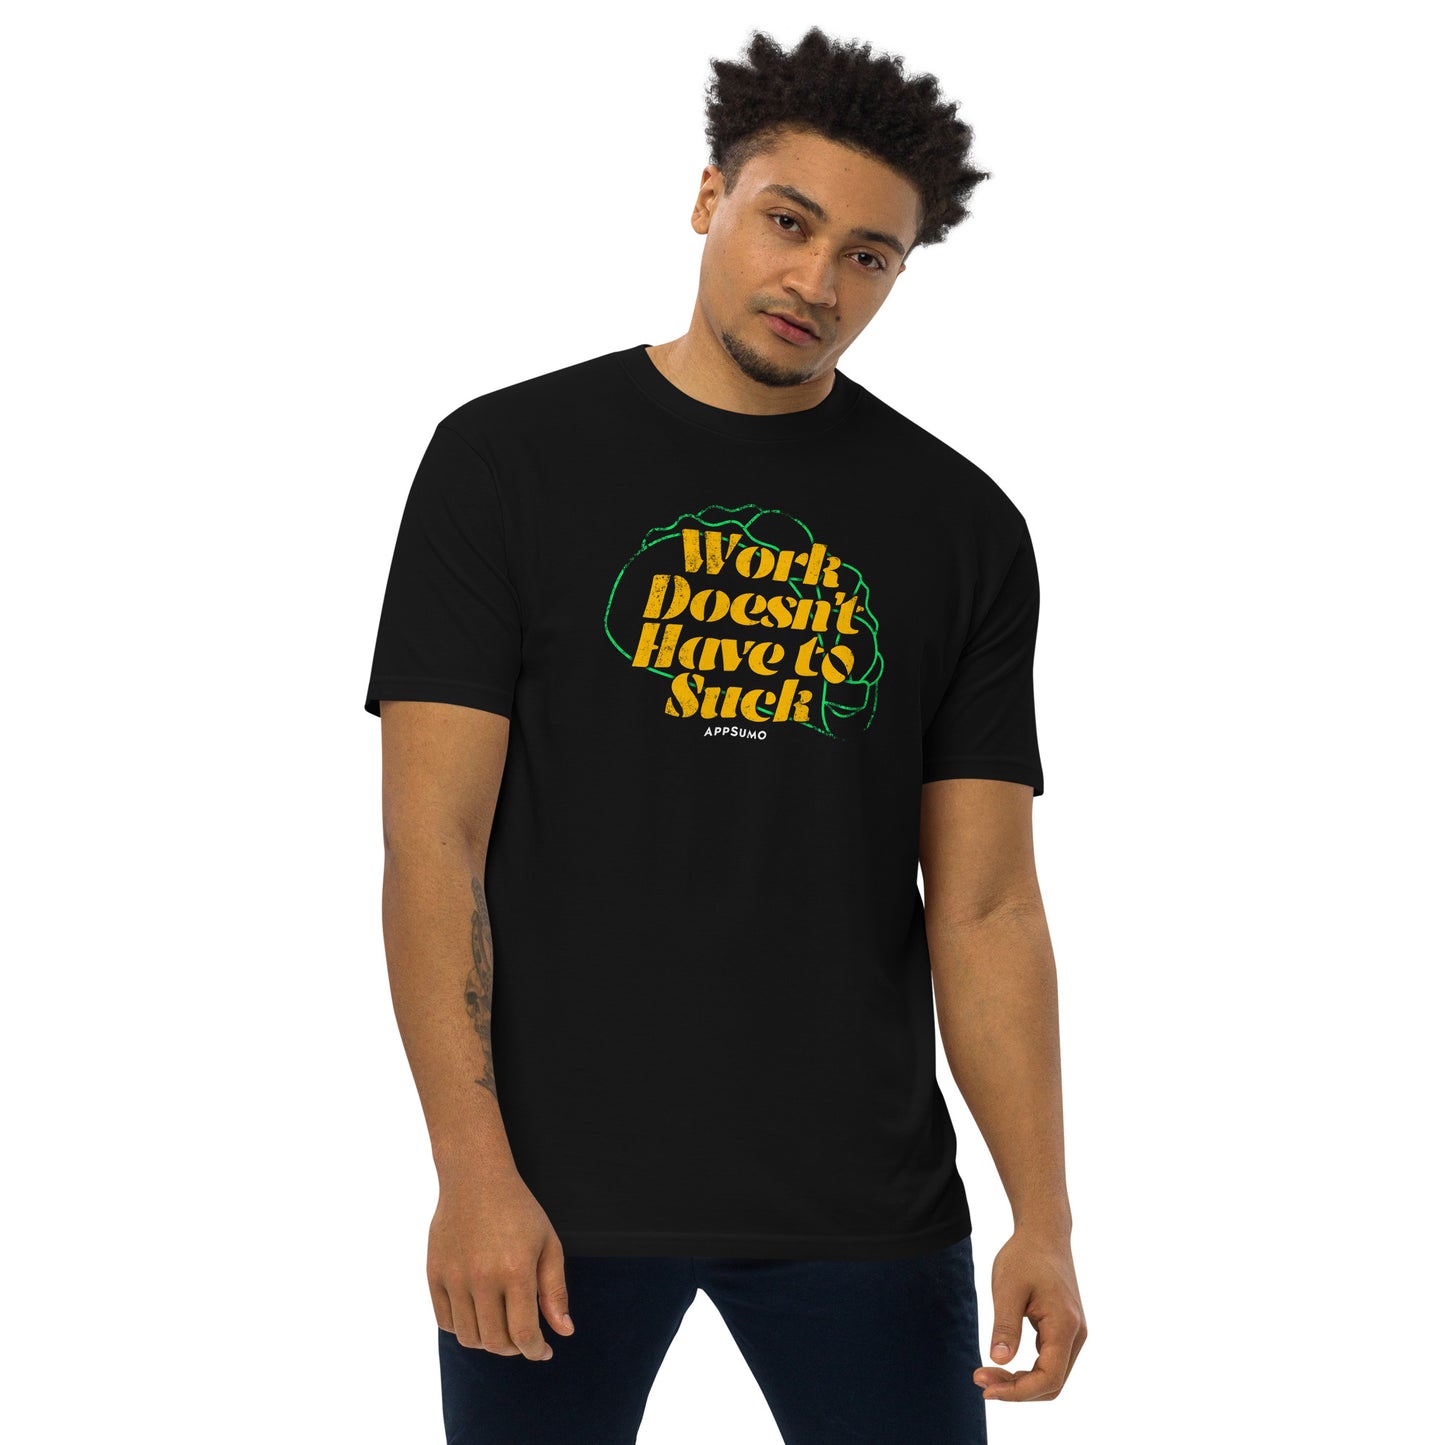 Work Doesn't Have to Suck - Premium heavyweight tee